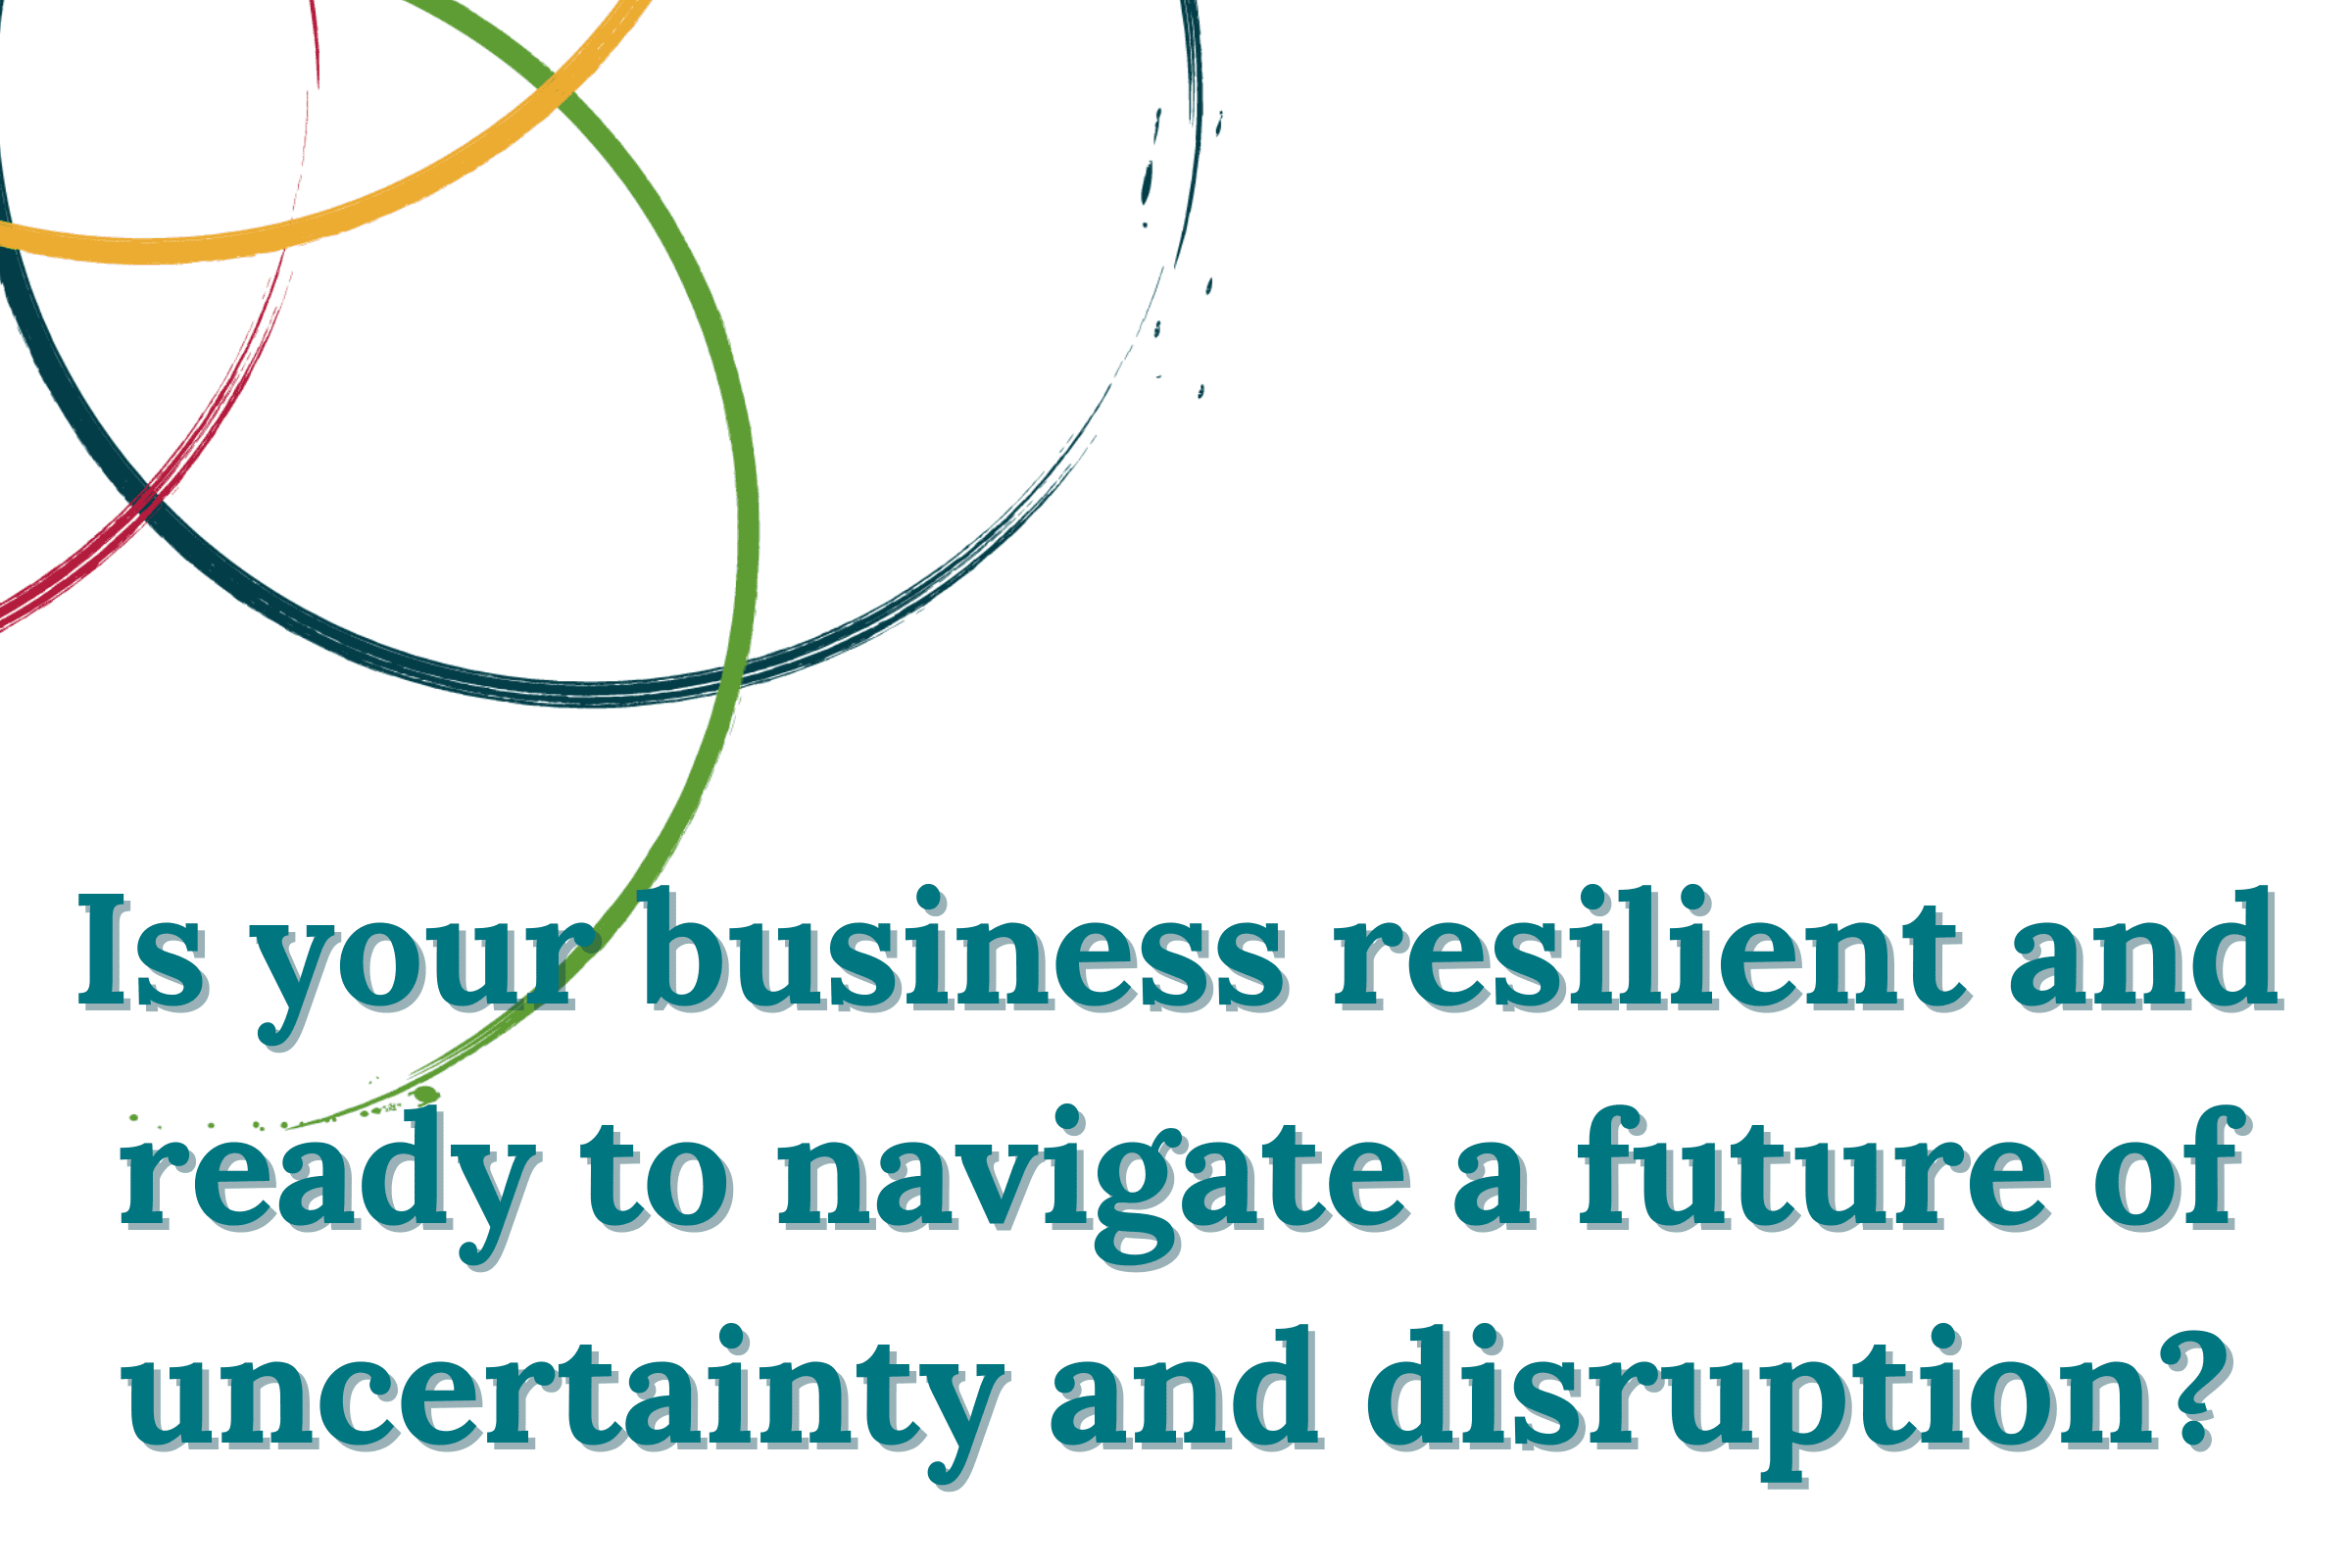 Is your business resilient?